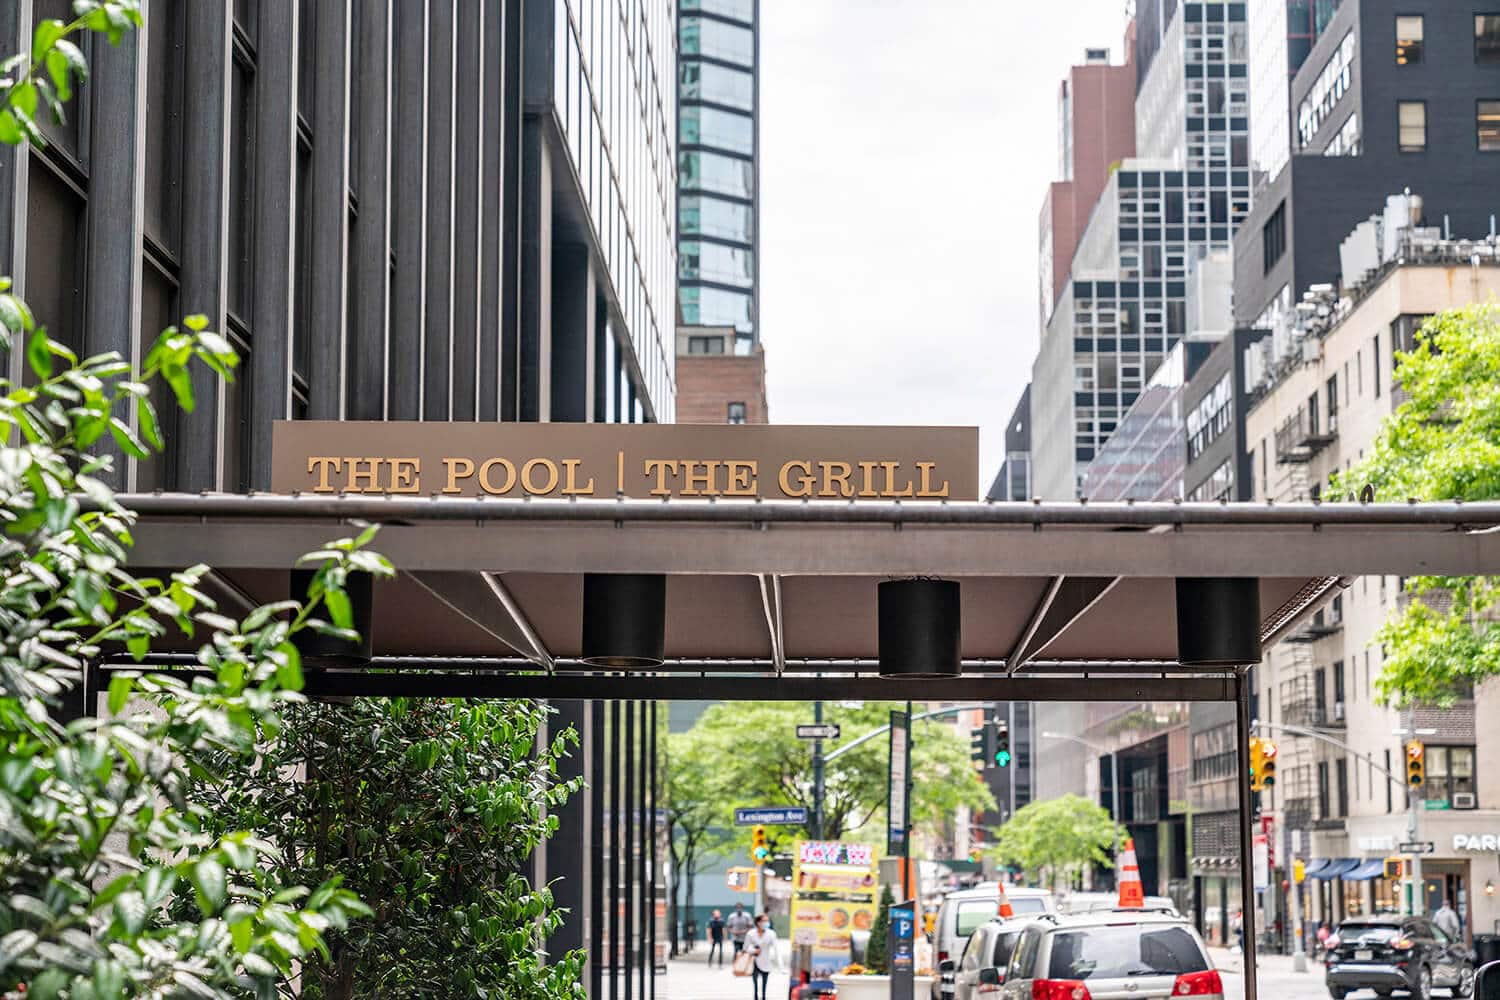 The Grill and The Pool restaurants located within walking distance to 695 Lexington